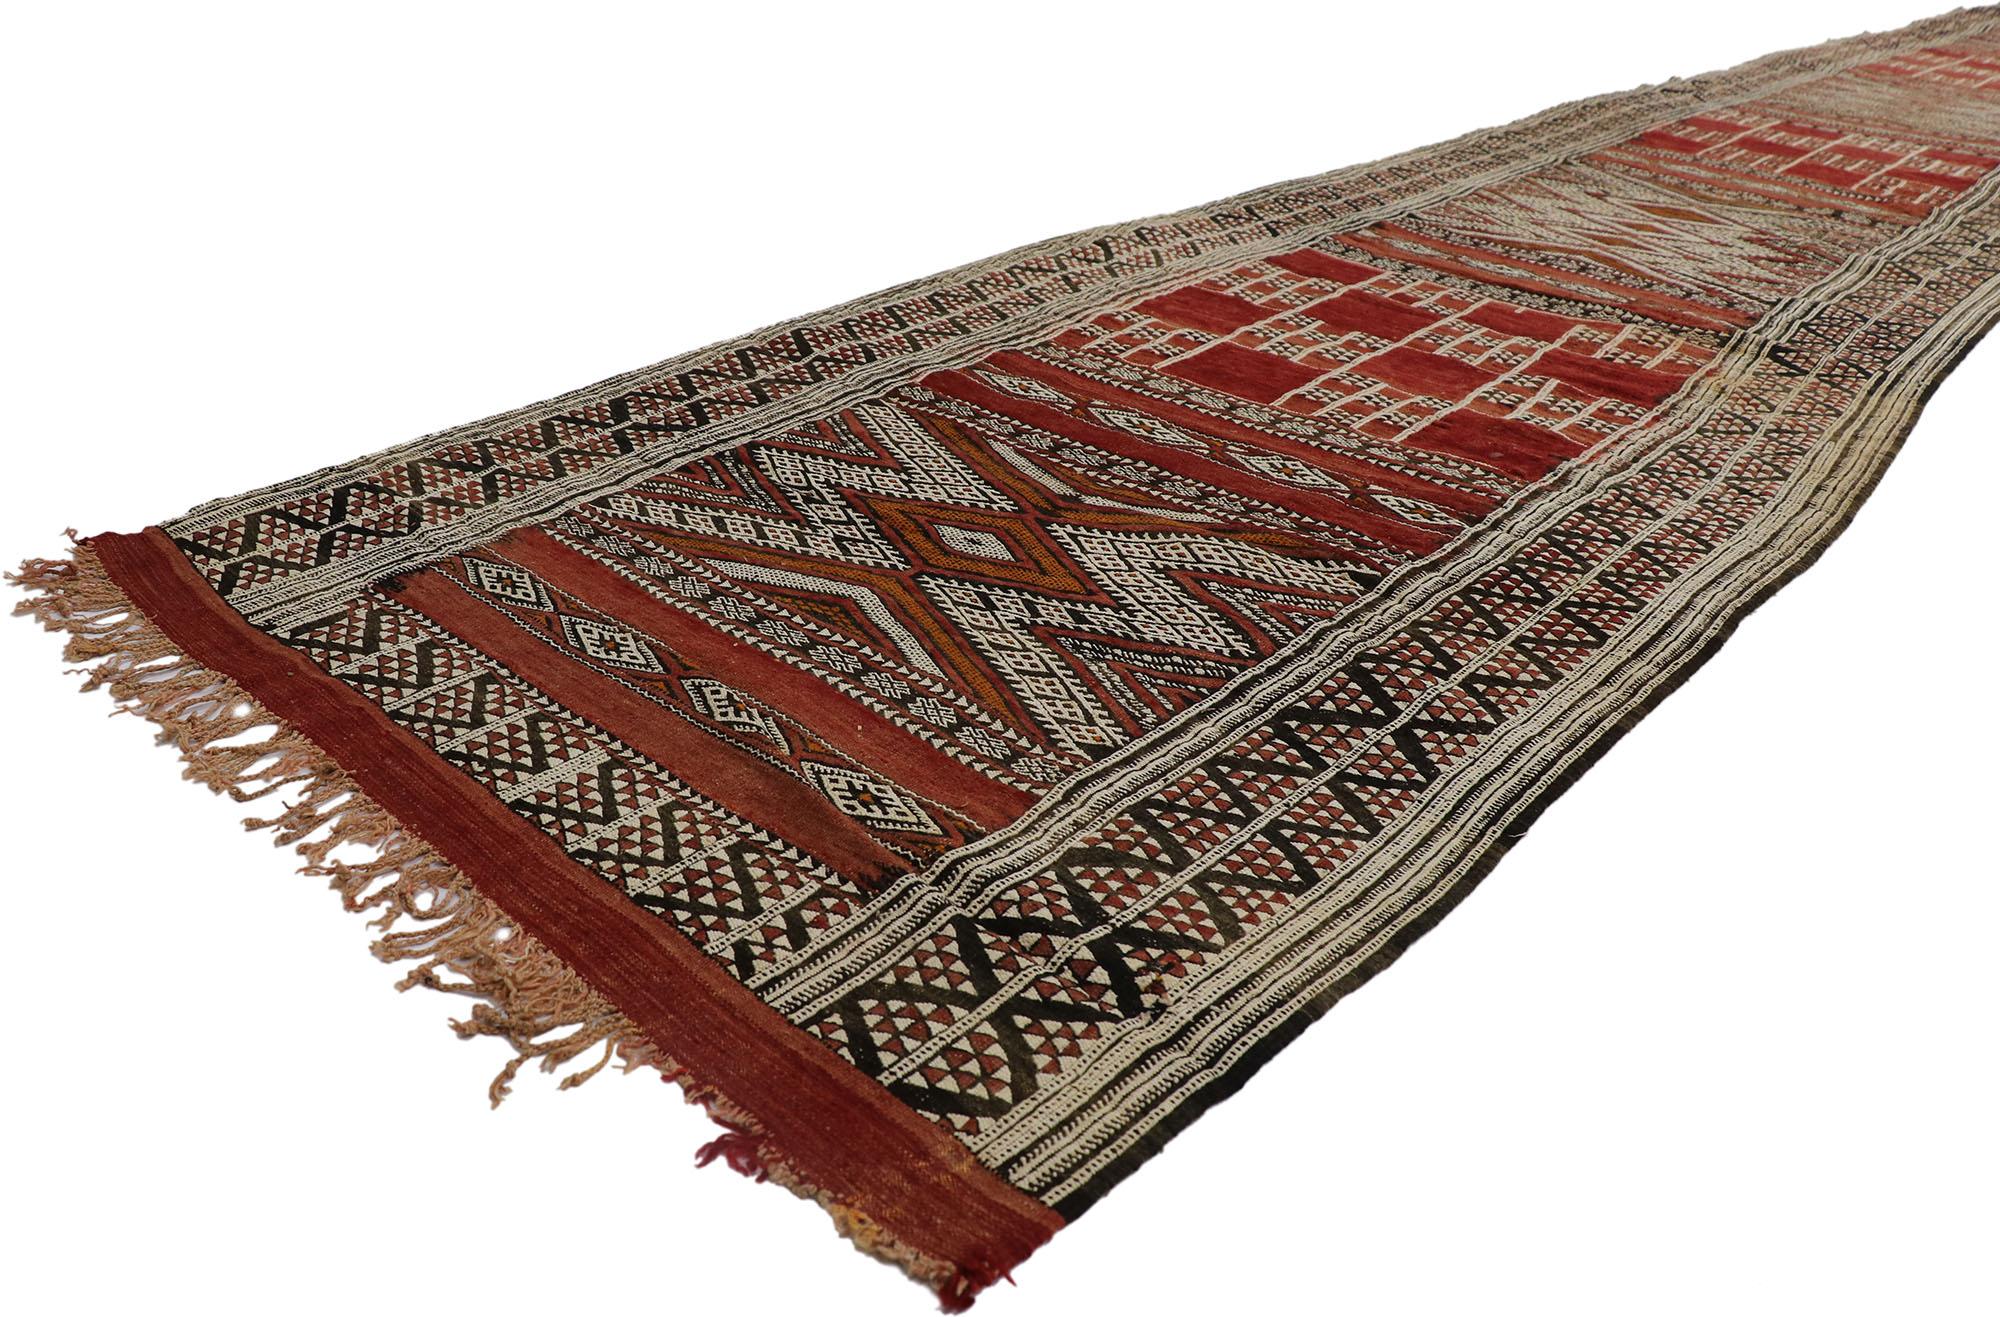 21186 vintage Zemmour Moroccan Kilim Runner with Tribal style 03'03 x 27'04. Full of tiny details and a bold expressive design combined with tribal style, this hand-woven wool vintage Zemmour Berber Moroccan kilim runner is a captivating vision of